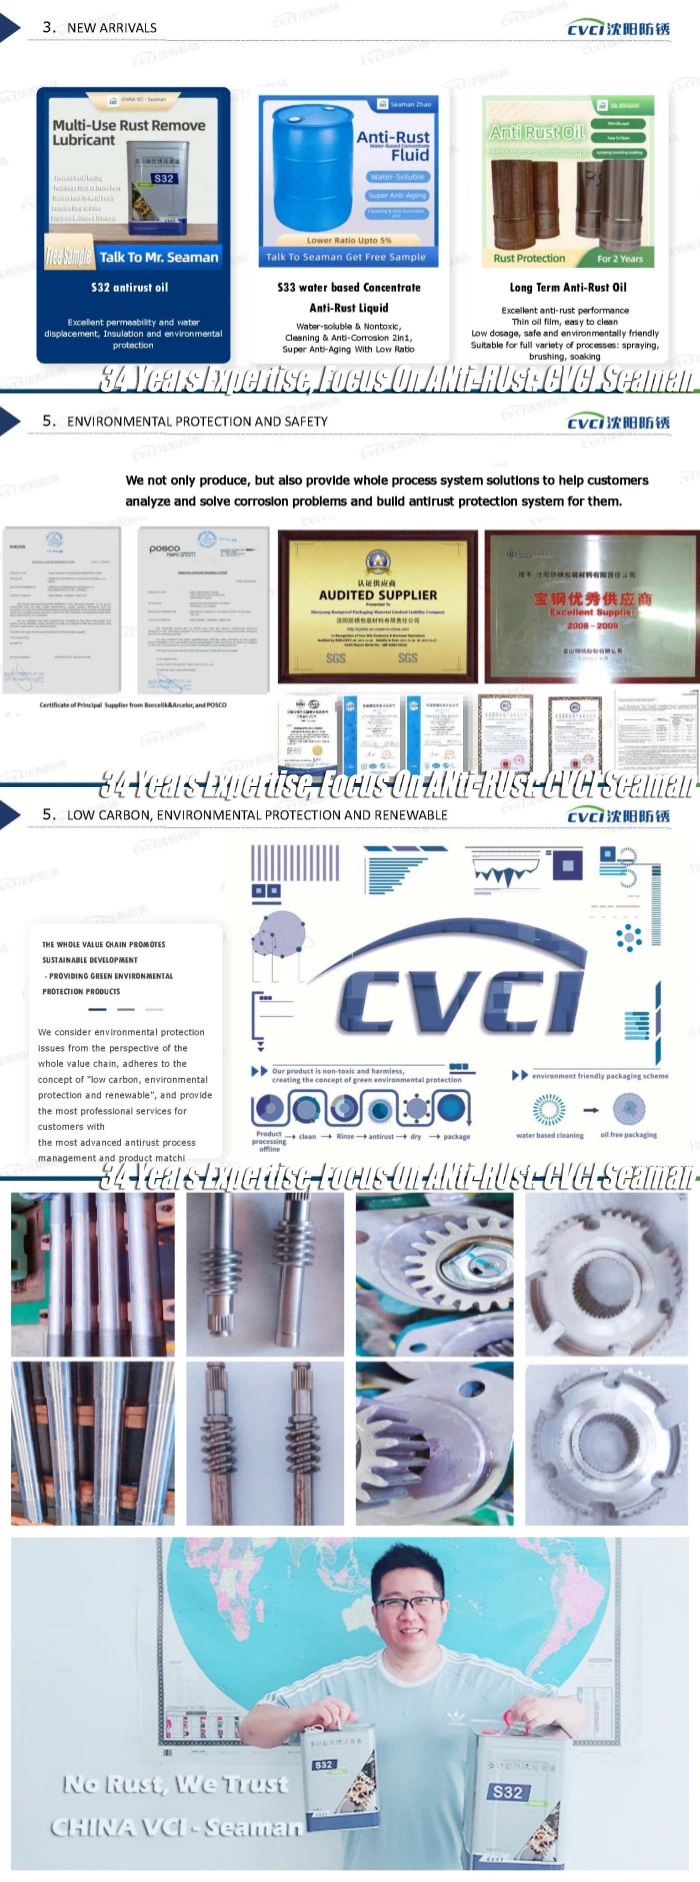 35 Years Factory Corrosion Protection Films Casting/Extrusion 2% Dosage Only Vci Master Batch